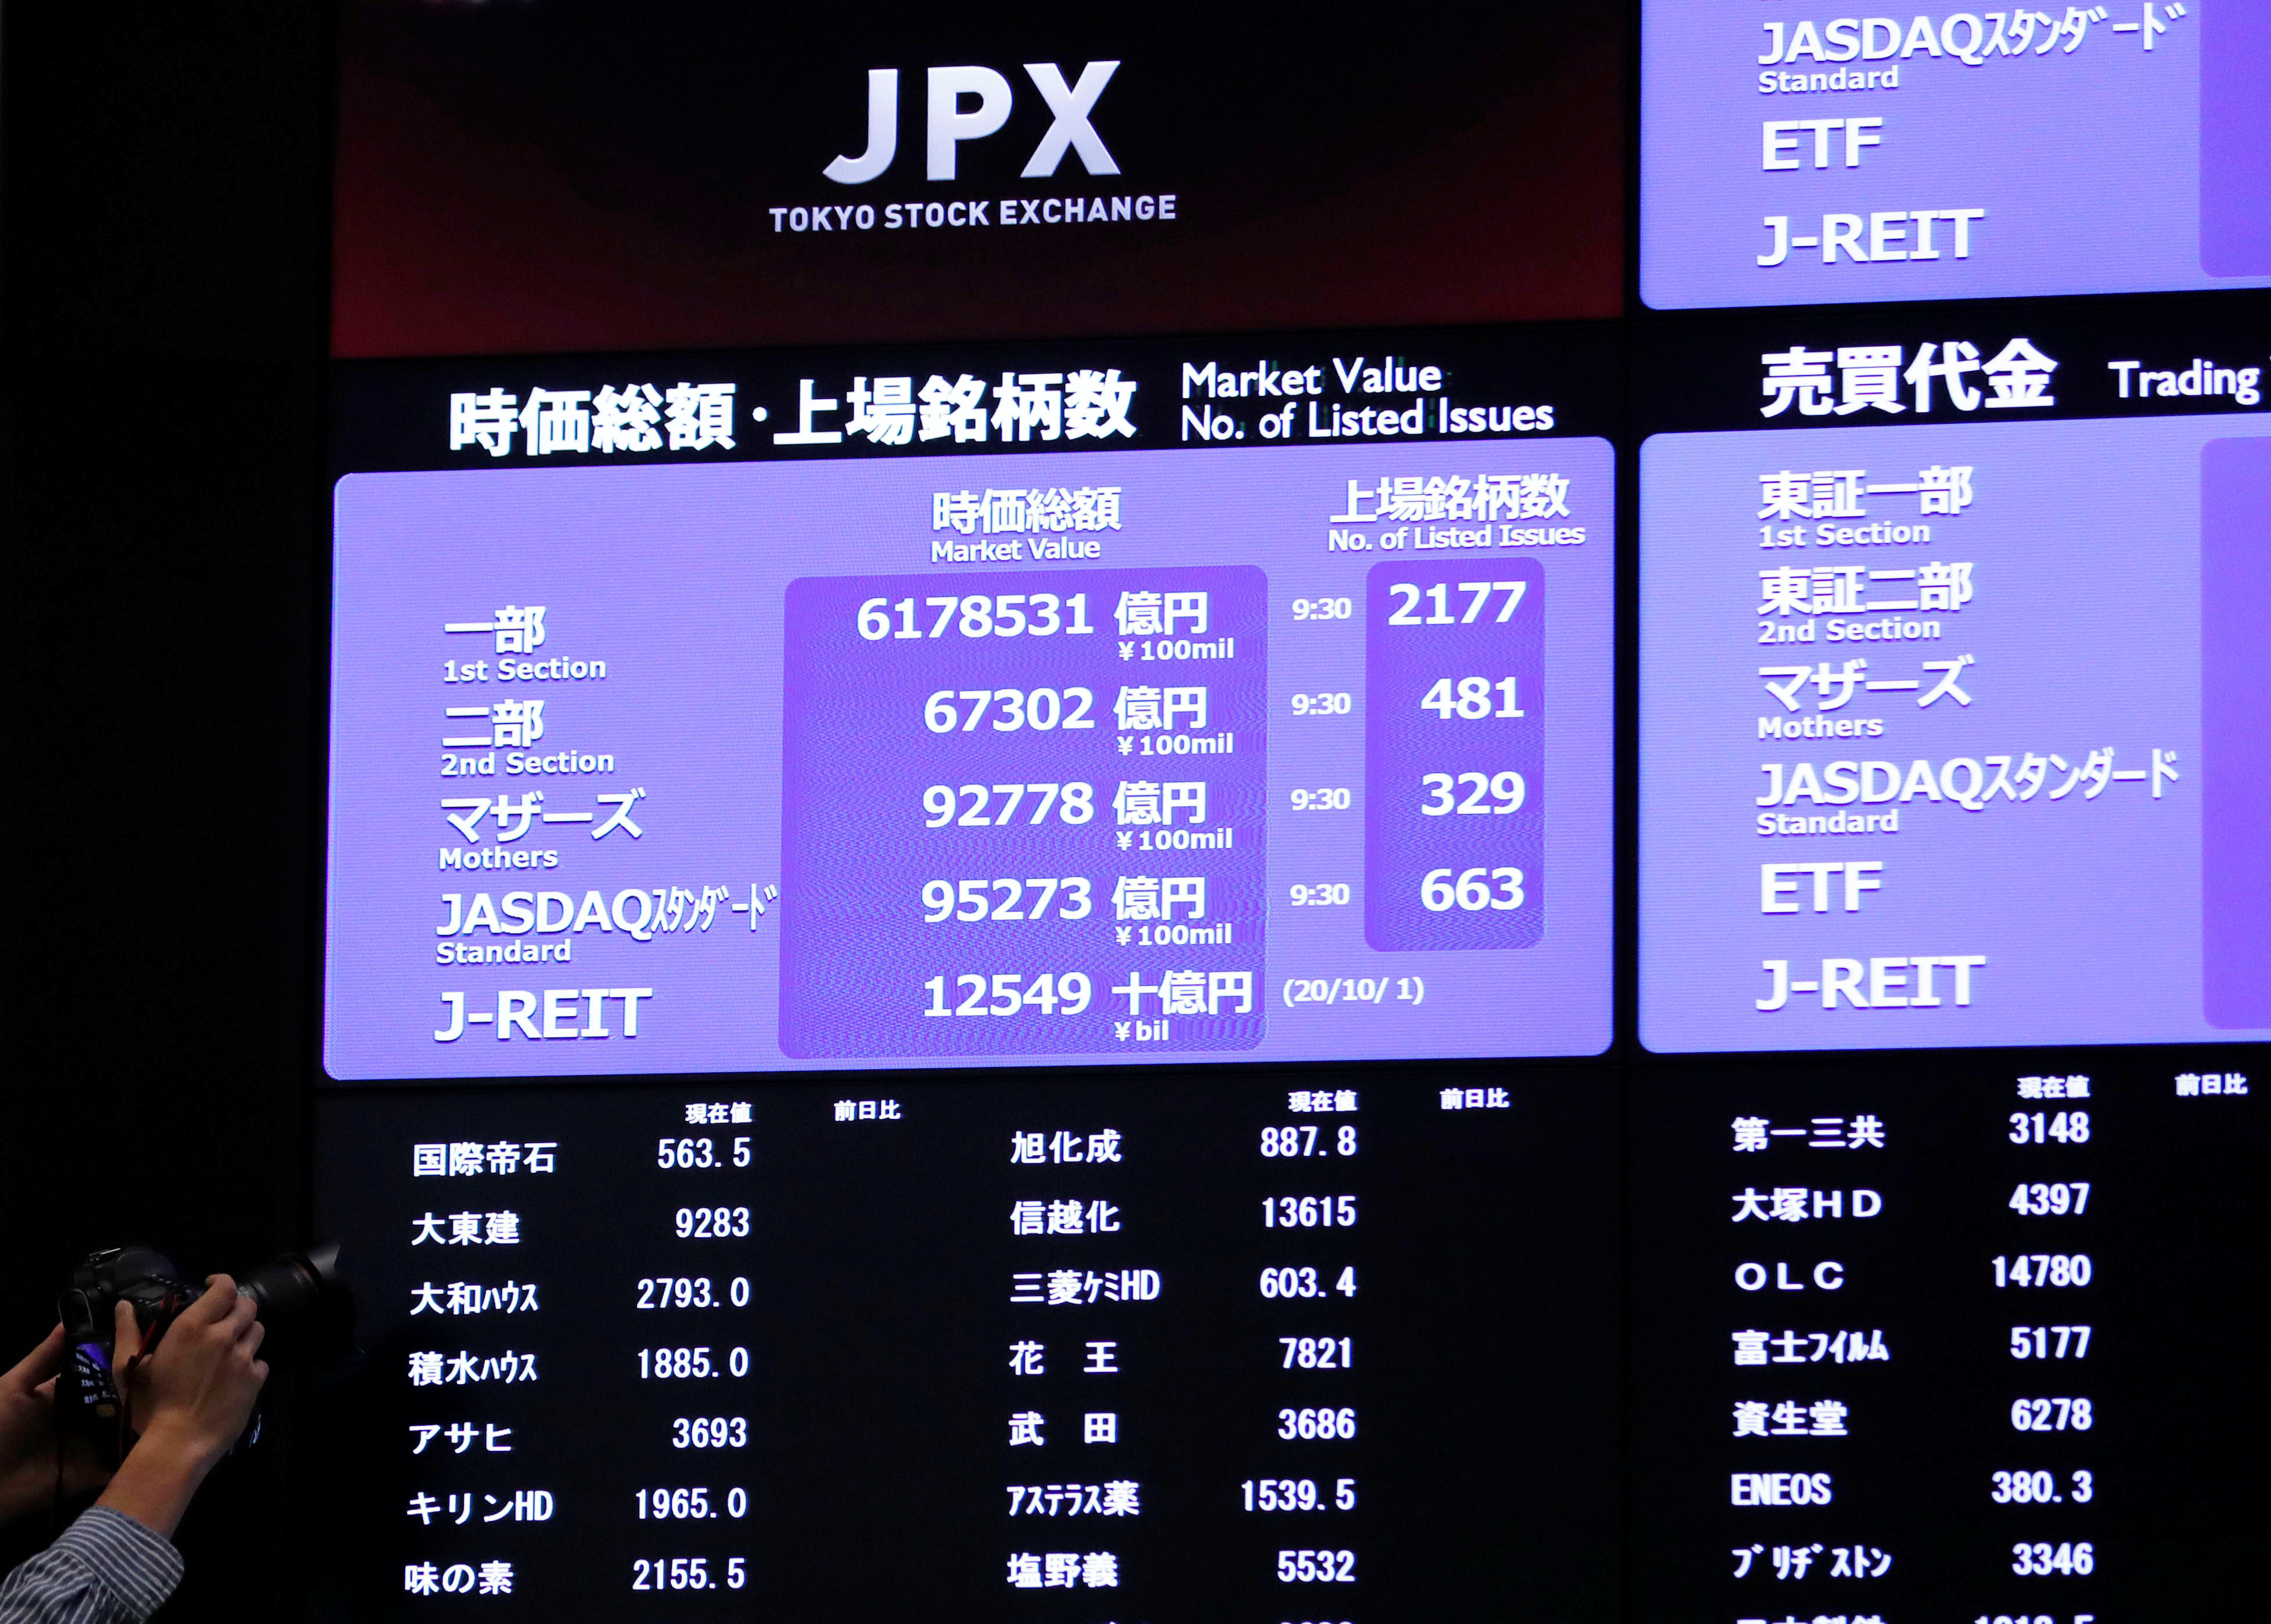 A photographer takes photo of a large screen showing stock prices at the Tokyo Stock Exchange after market opens in Tokyo